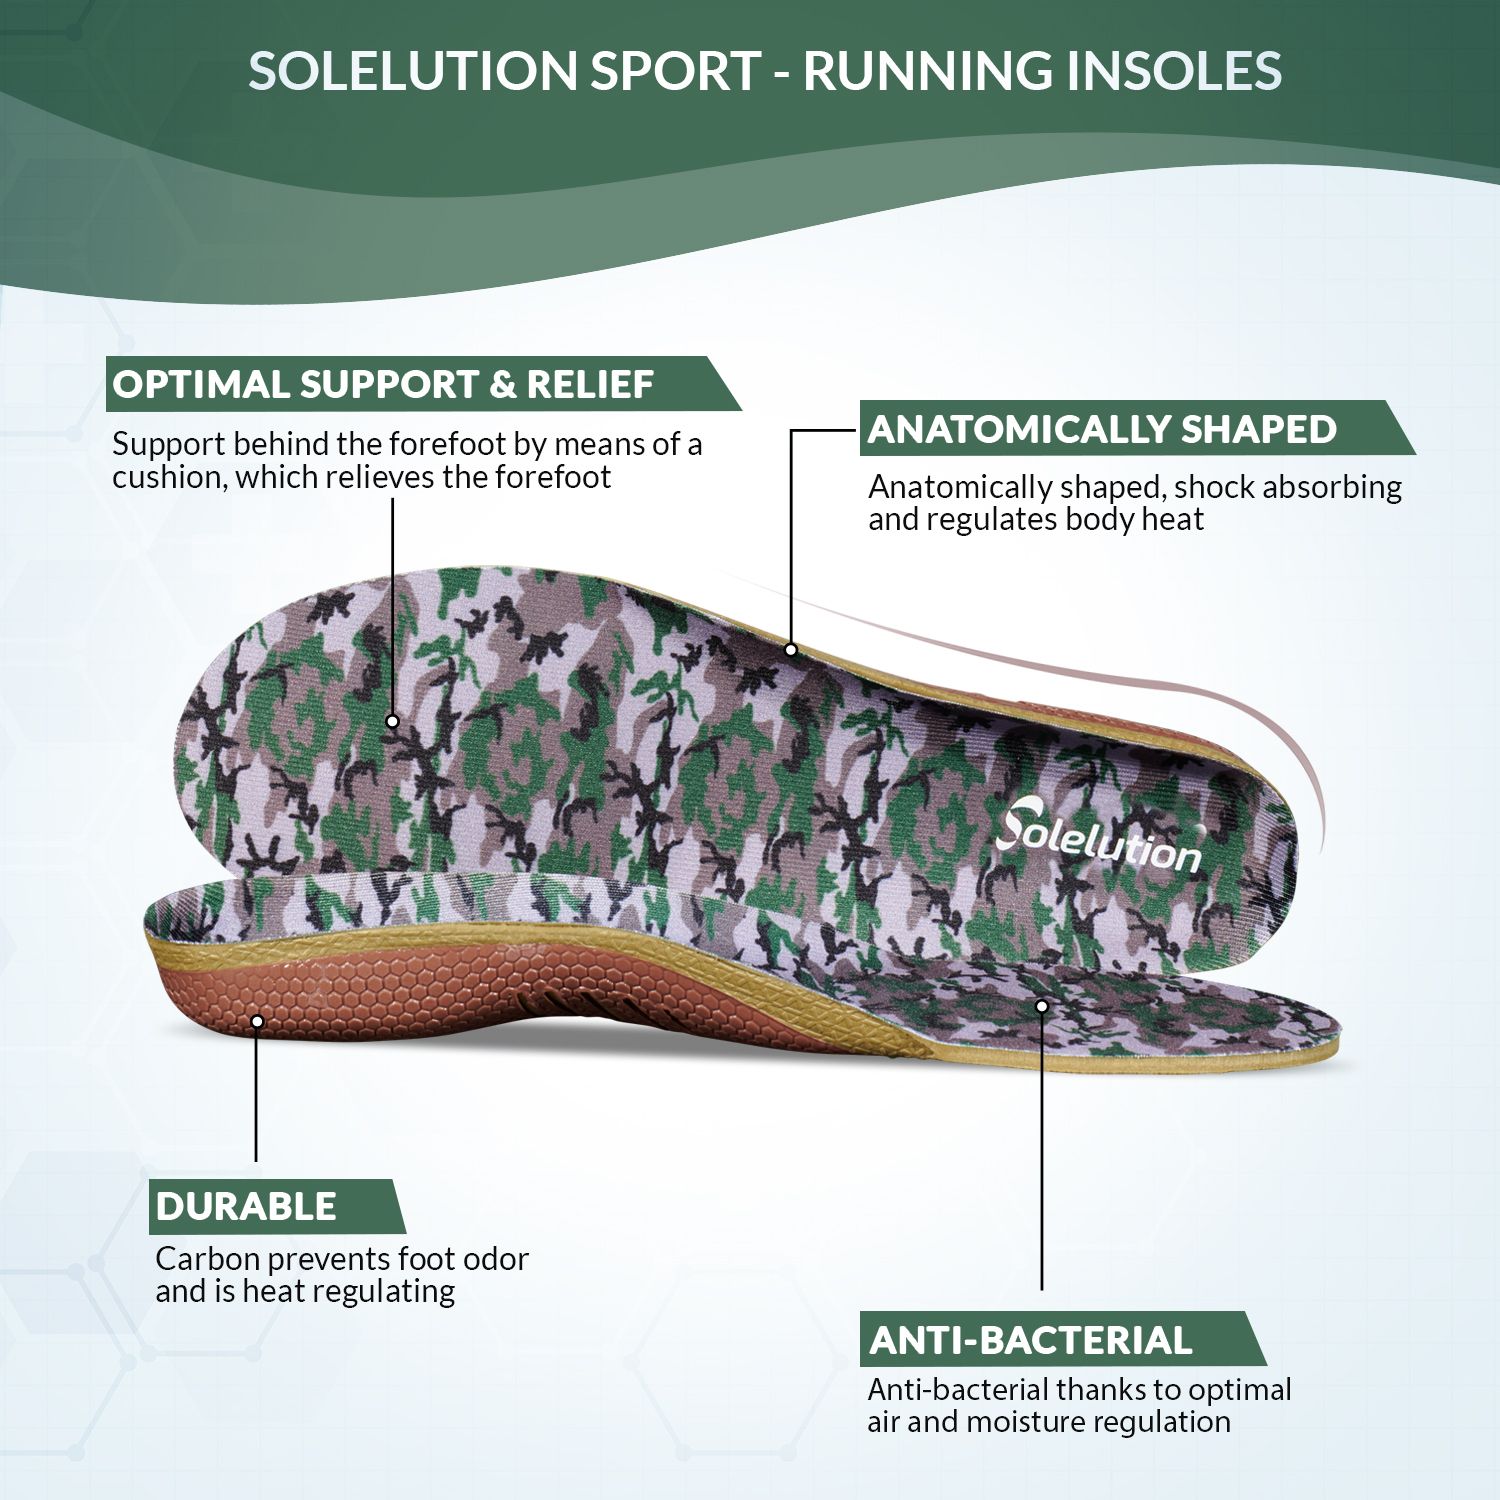 solelution sport runnings insoles product information